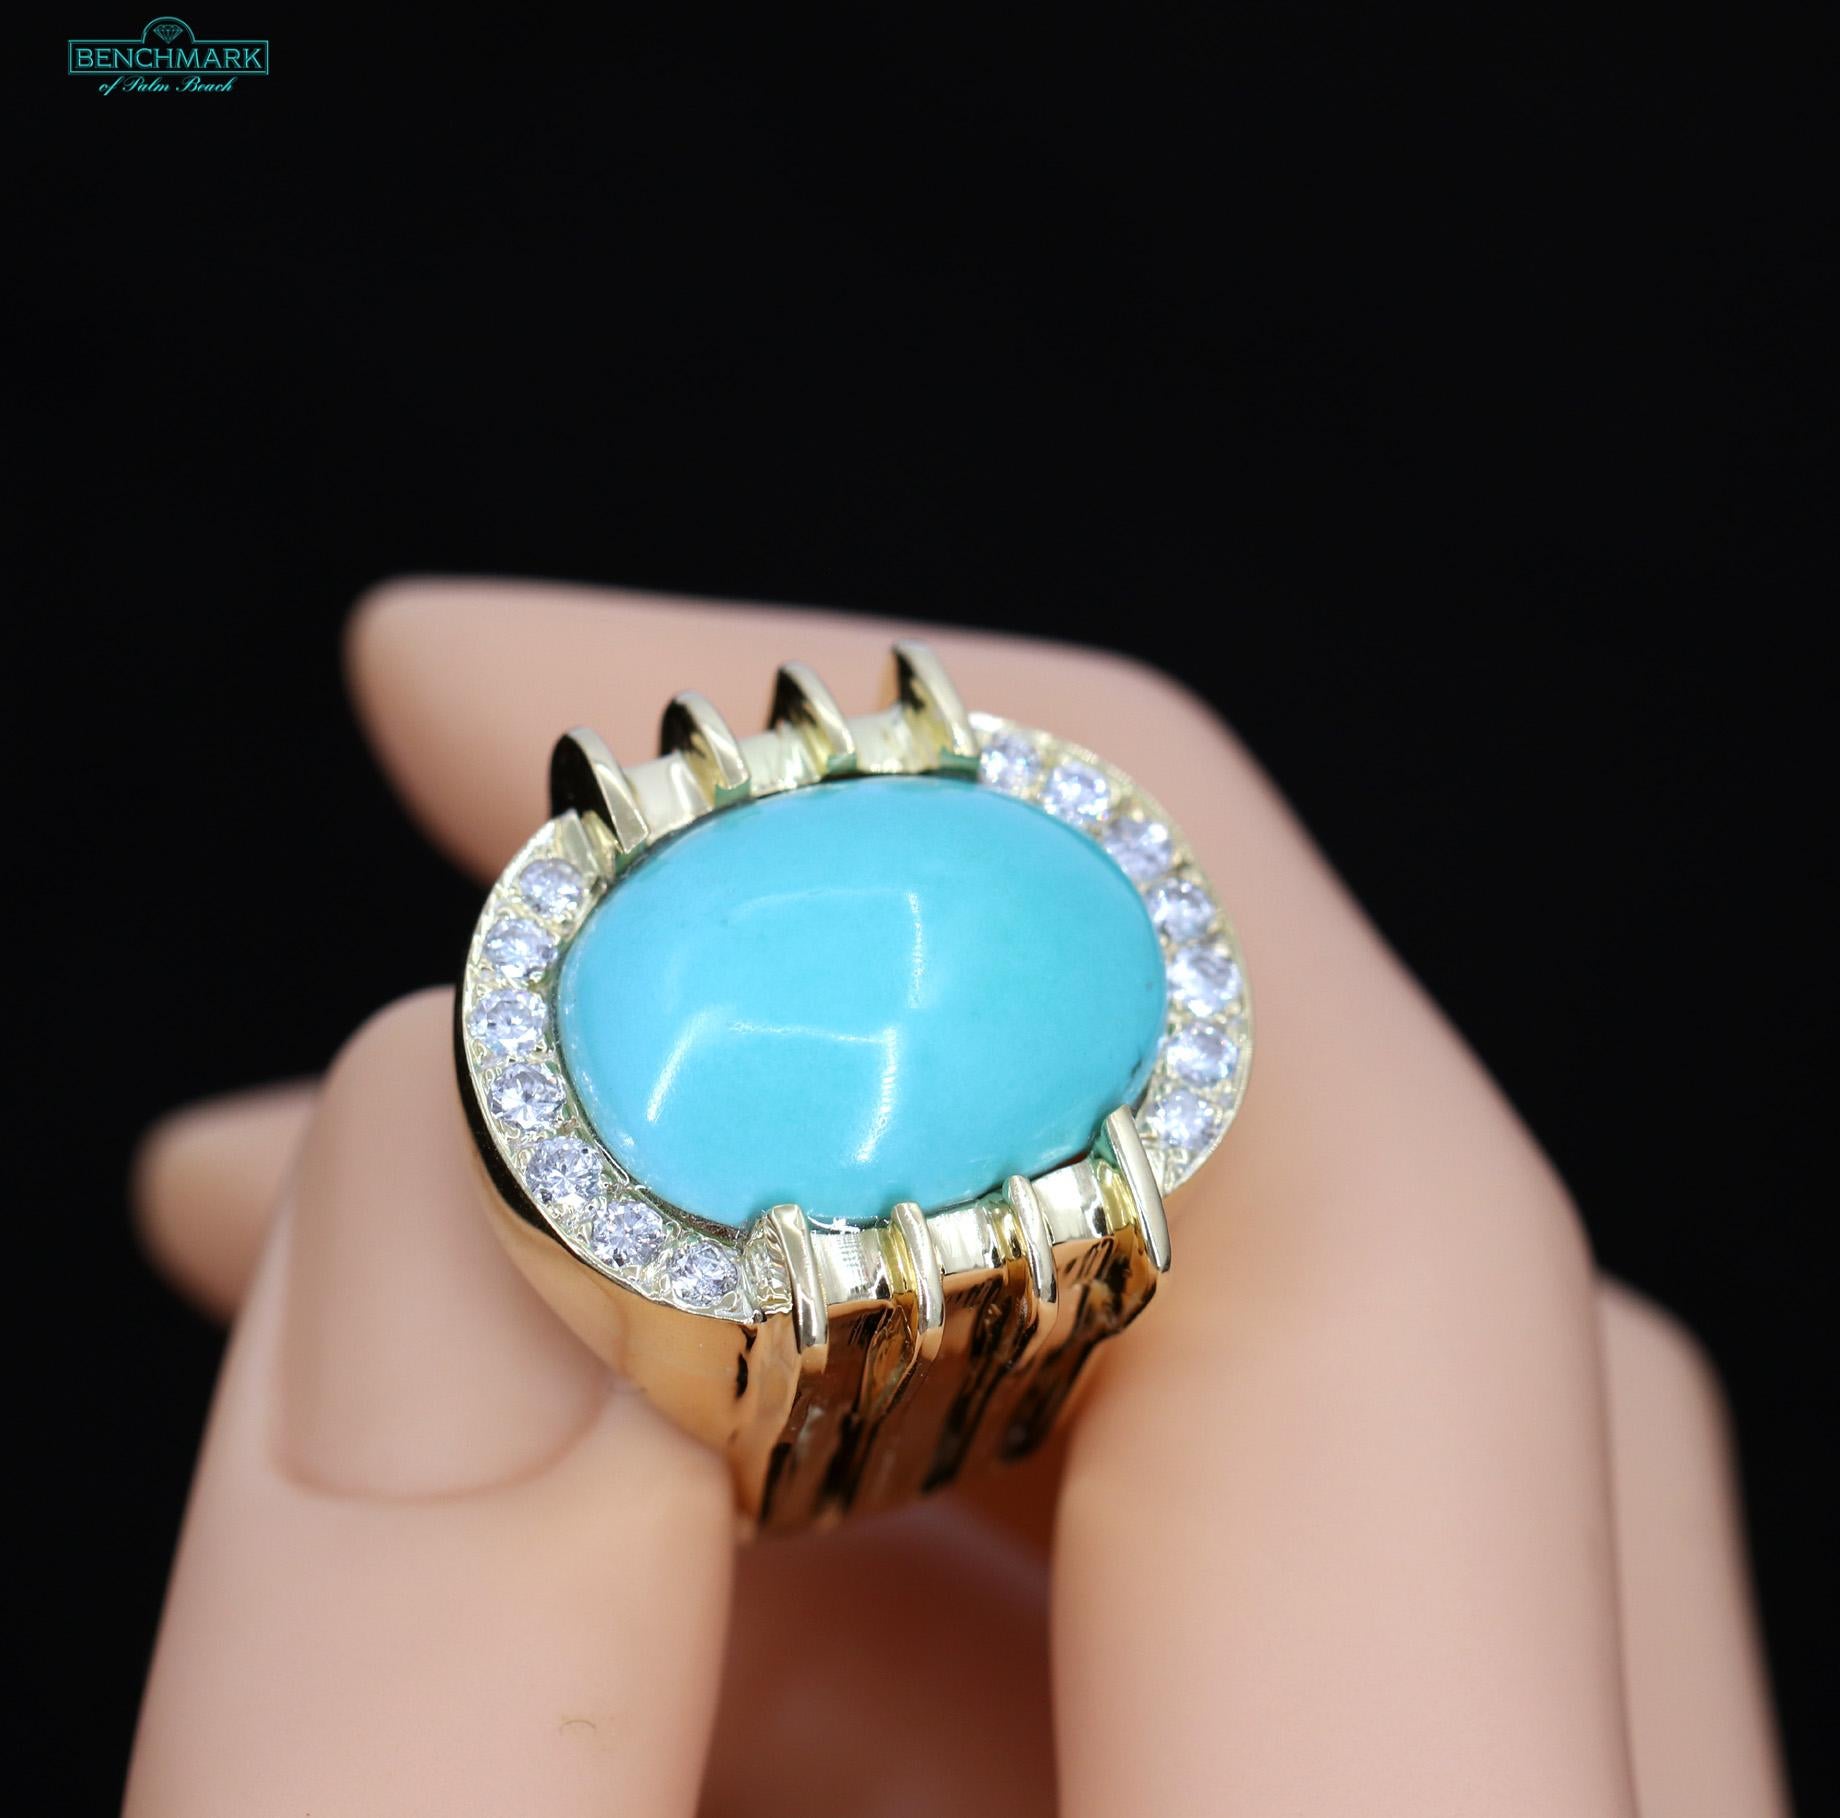 An 18K yellow gold ring centered around a cabochon turquoise measuring 22mm by 17mm, and featuring 7 round brilliant cut diamonds on the north side and 7 round brilliant cut diamonds on the south side of the ring for a total approximate weight of